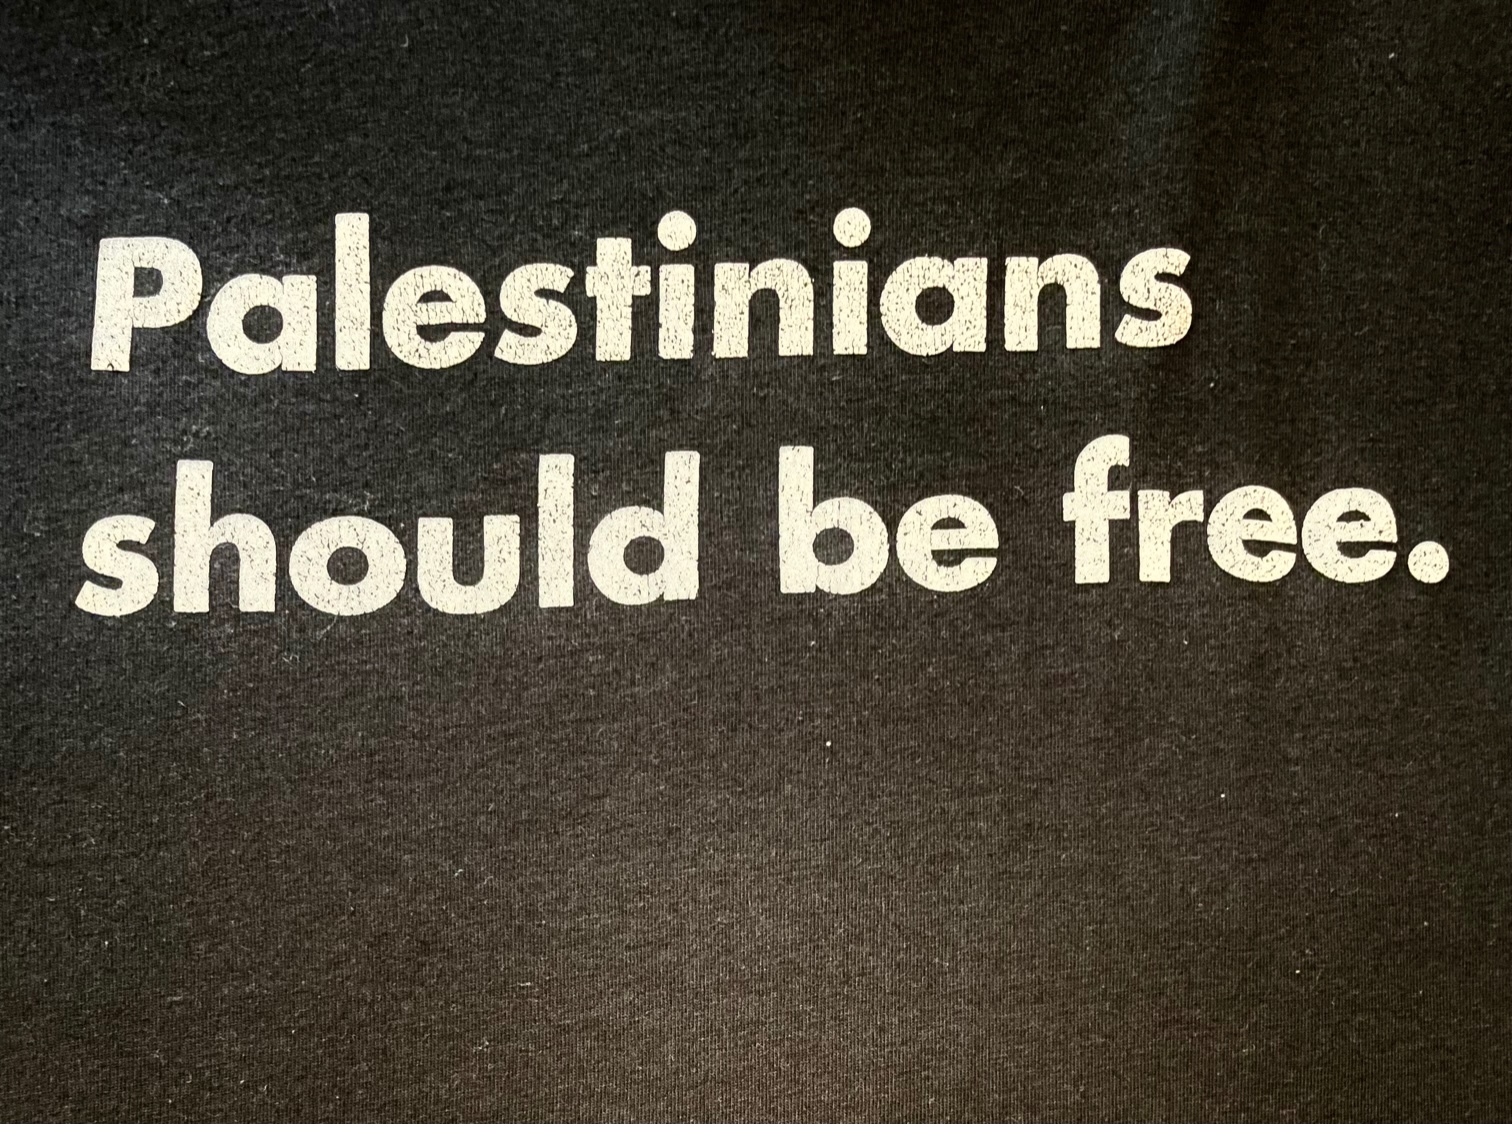 Image says "Palestinians should be free."